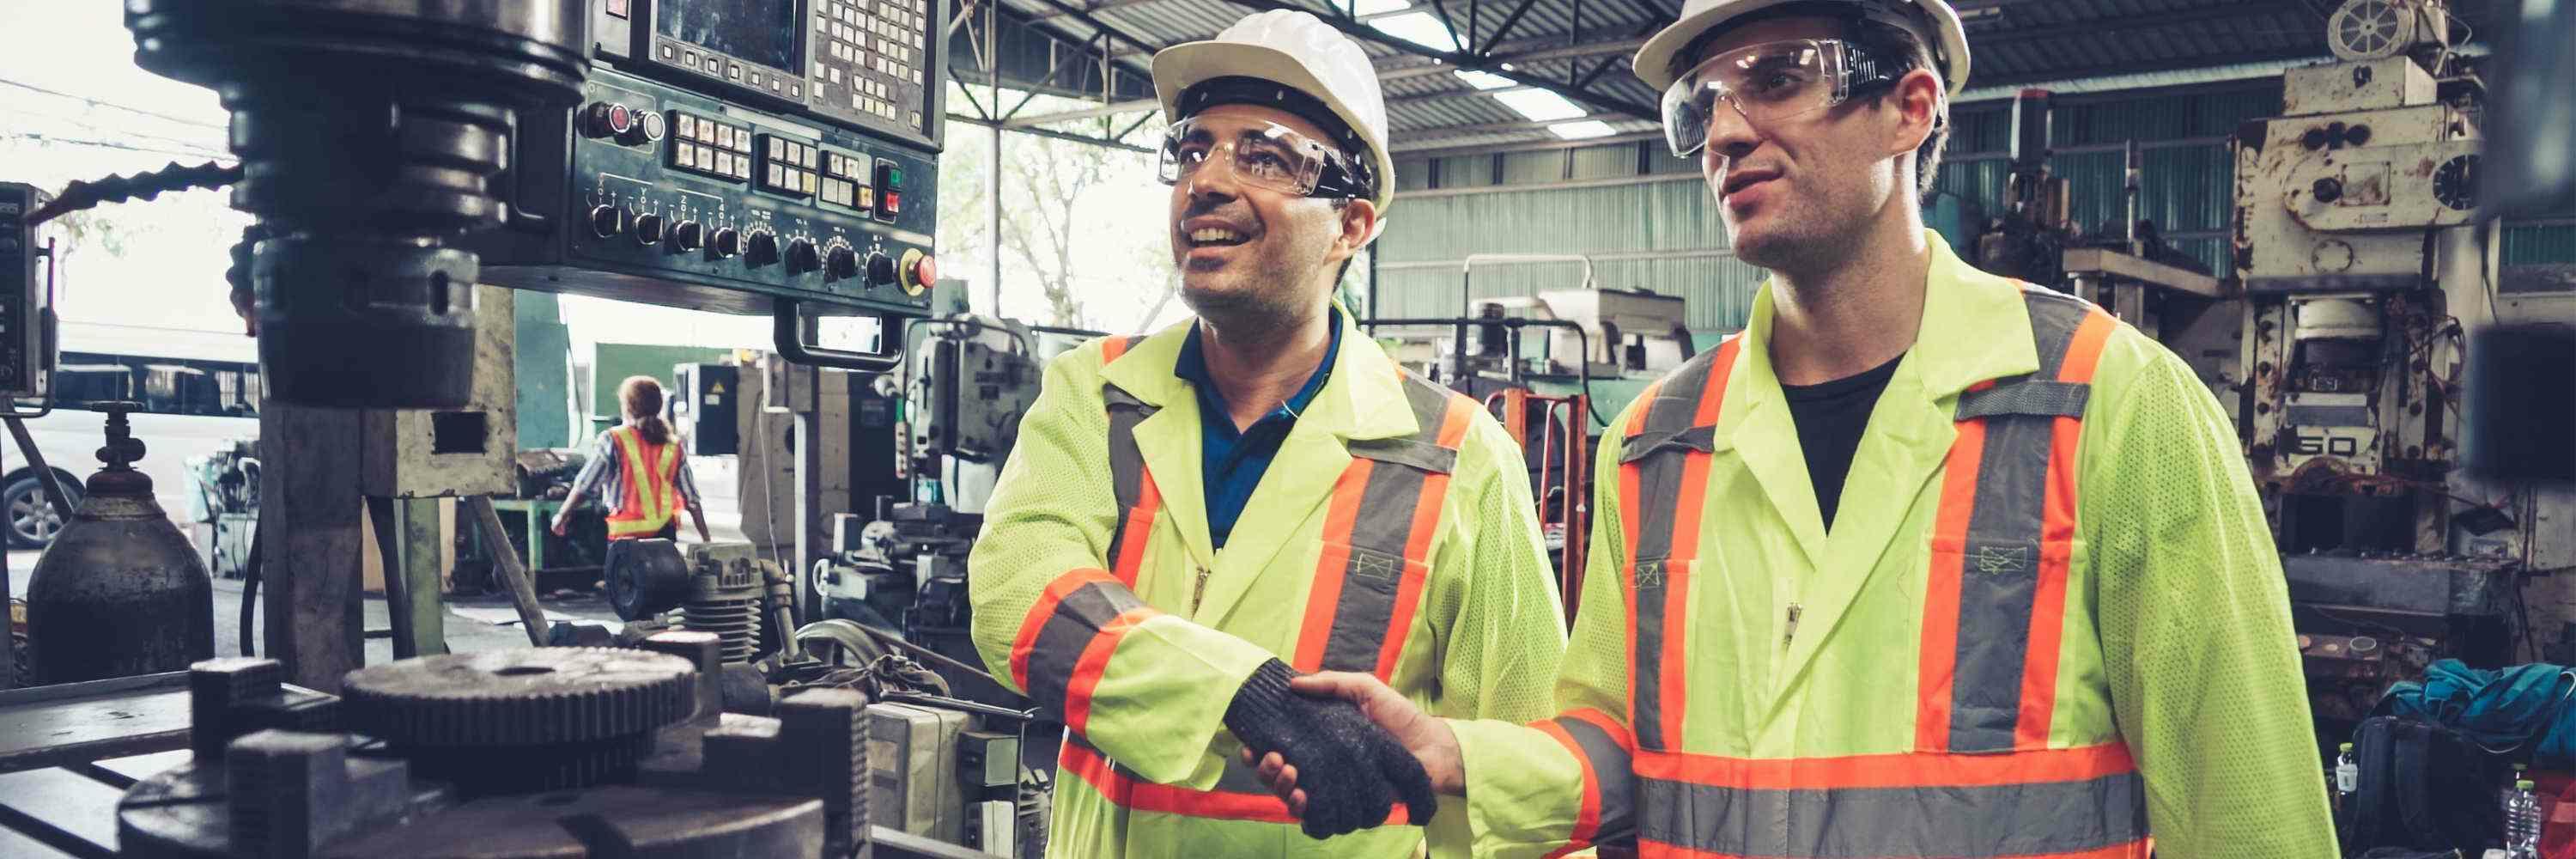 Two machinists in yellow safety vests shaking hands and smiling at the success of a working machine